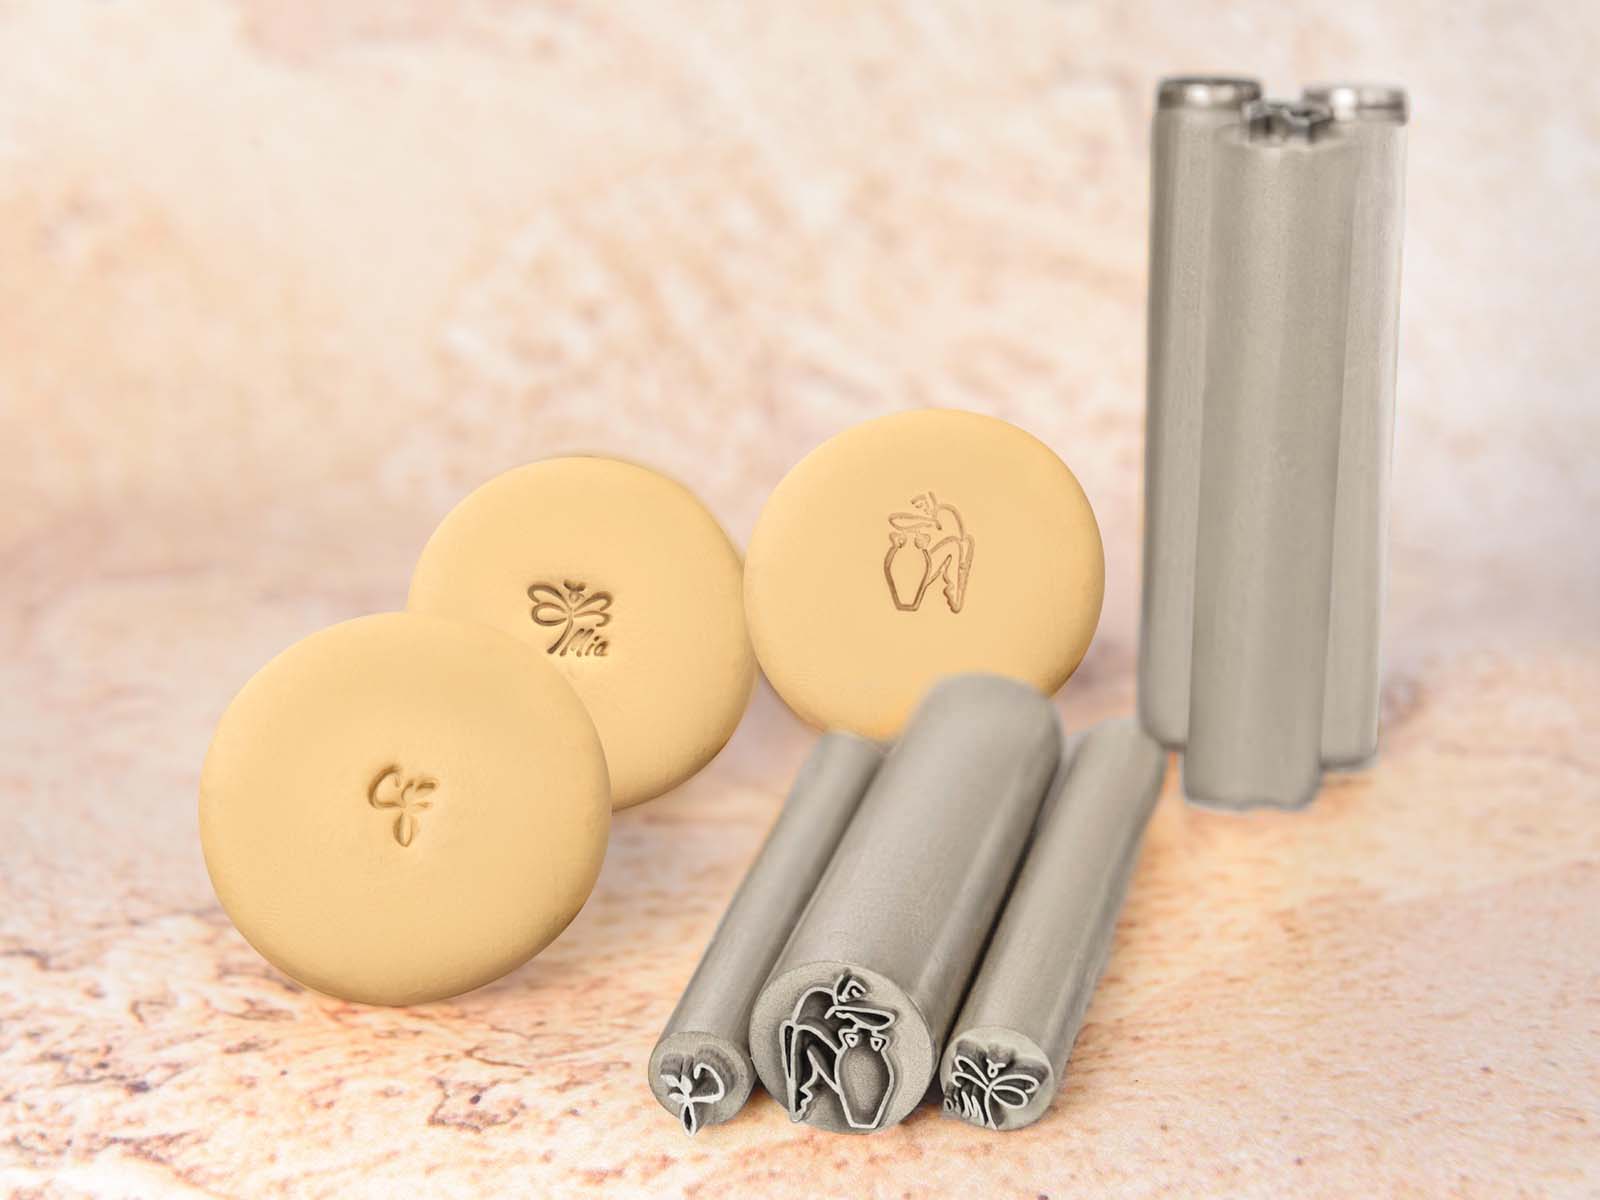 Personalized metal stamps for pottery allow for the addition of intricate designs and patterns to clay creations, whether you're a seasoned professional or just starting out.